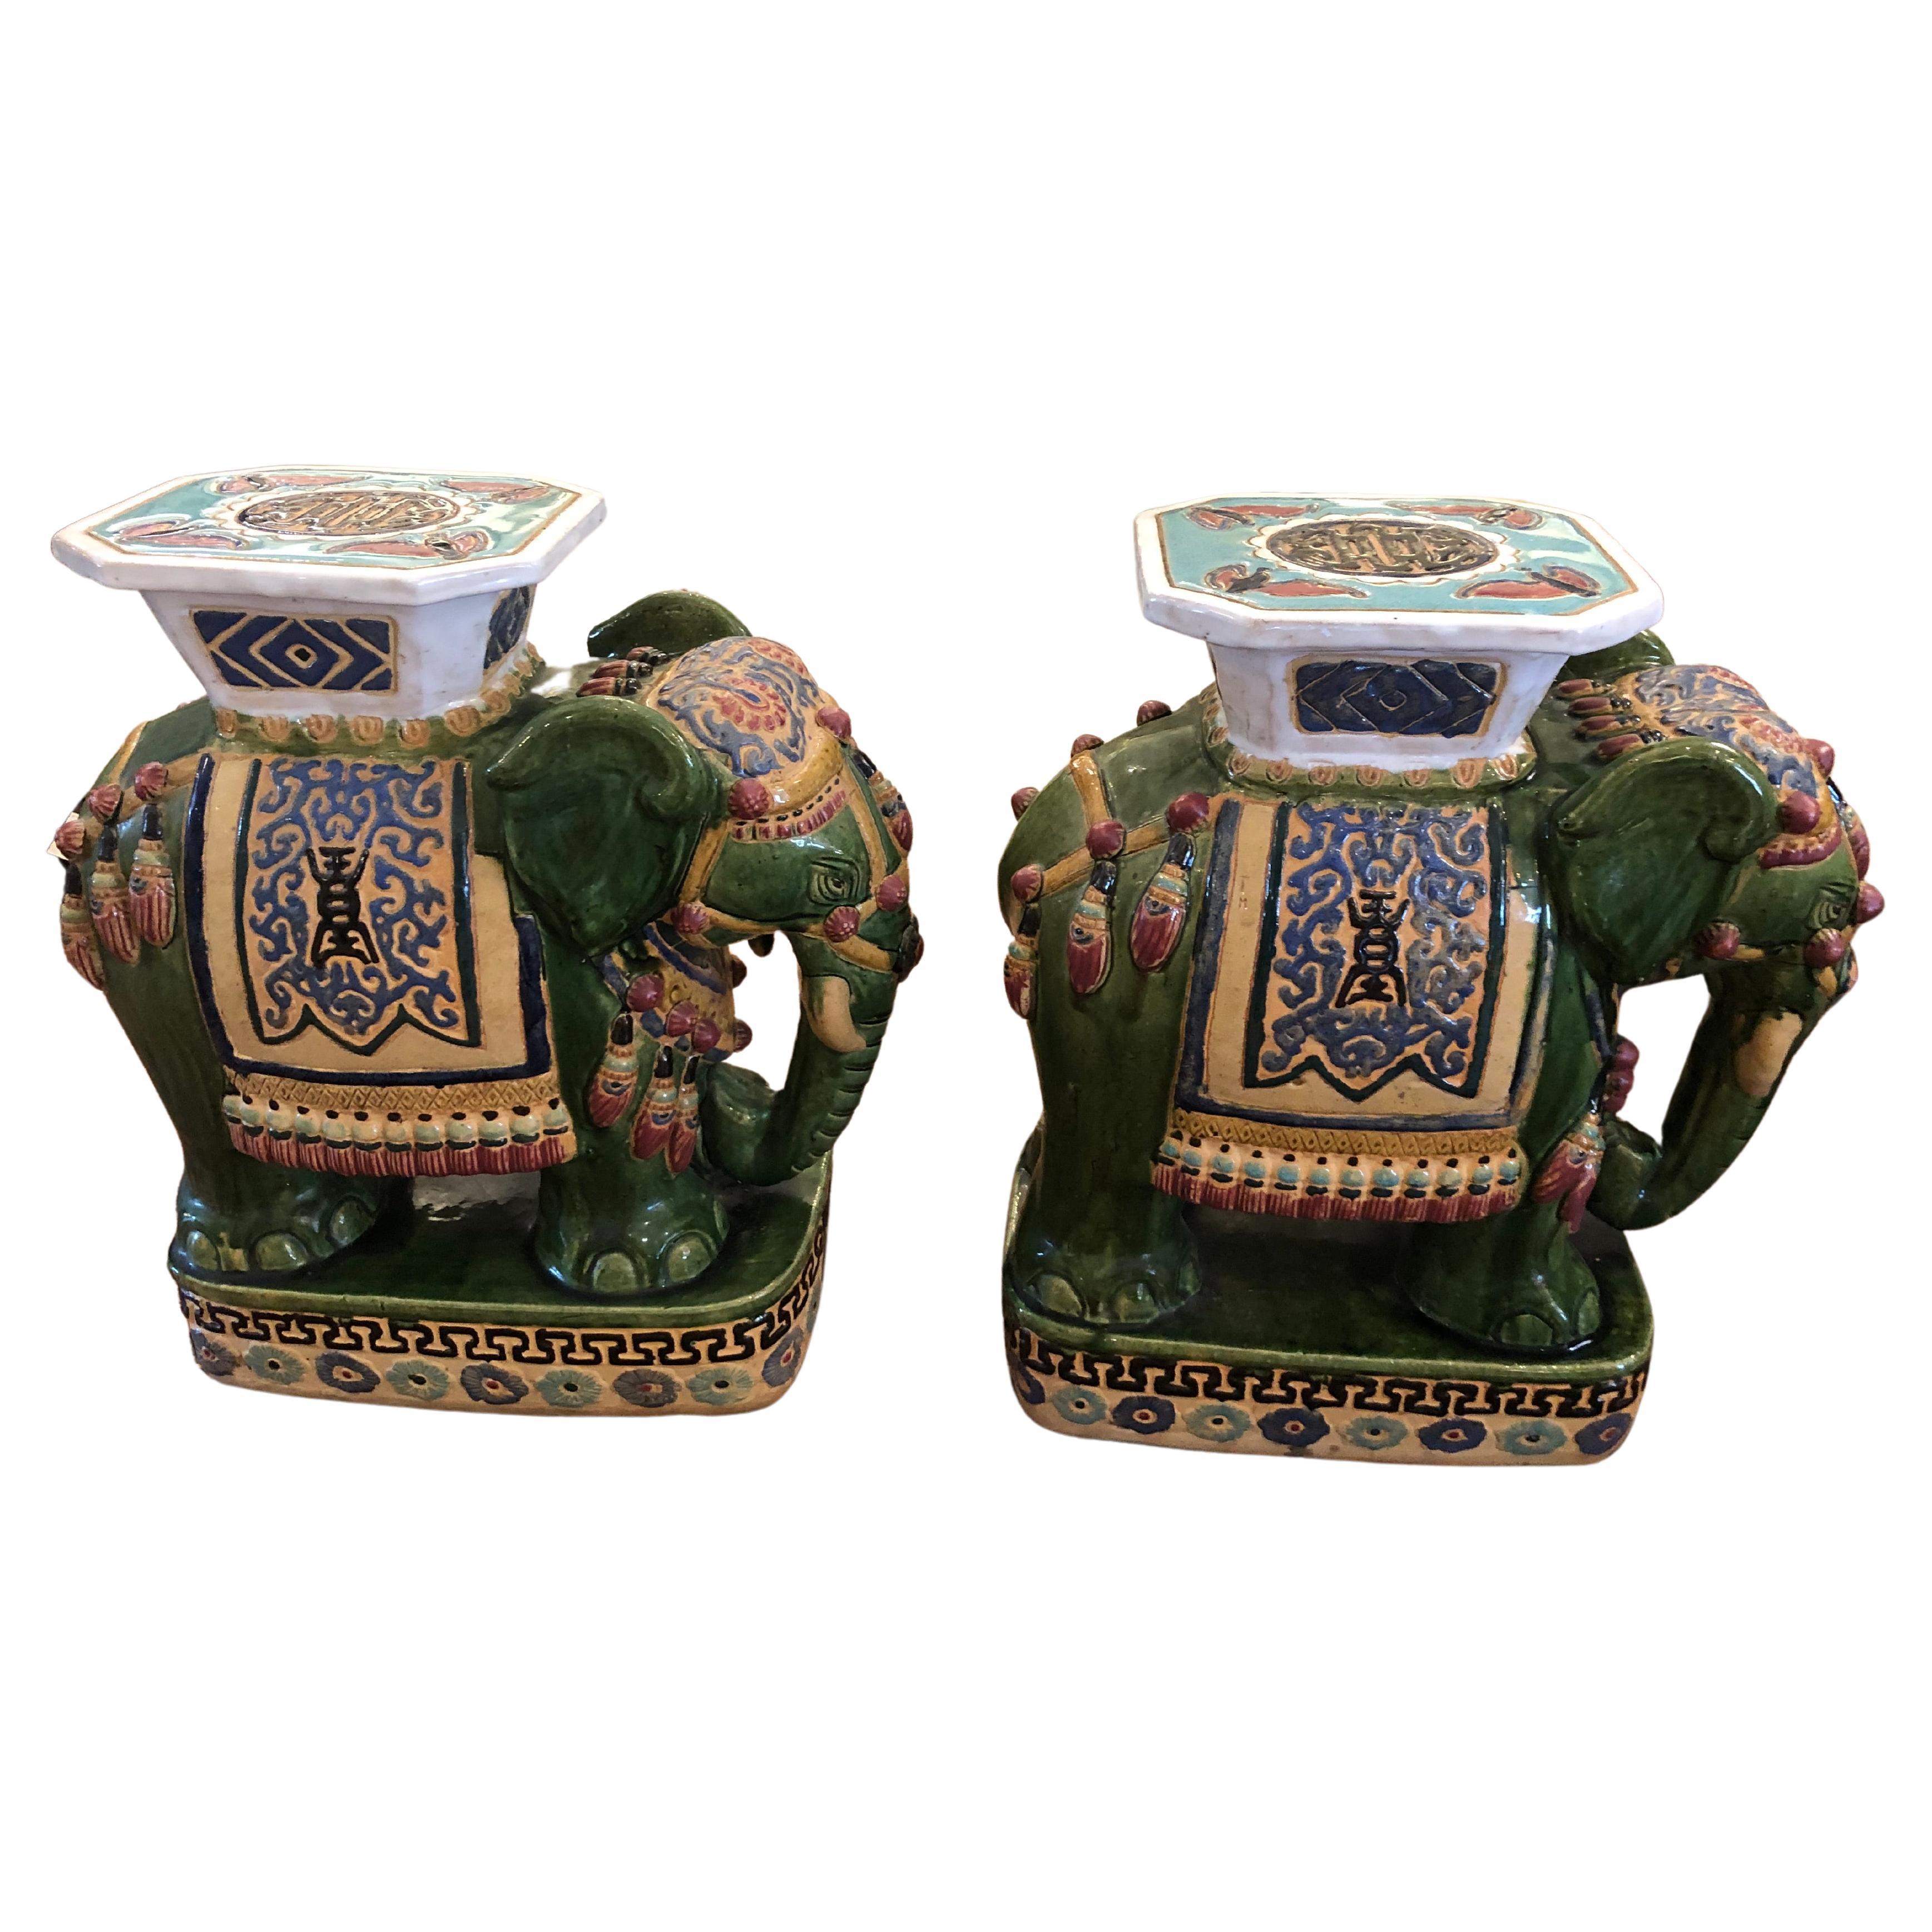 Pair of Chinese Ceramic Elephant Form Garden Seat End Tables